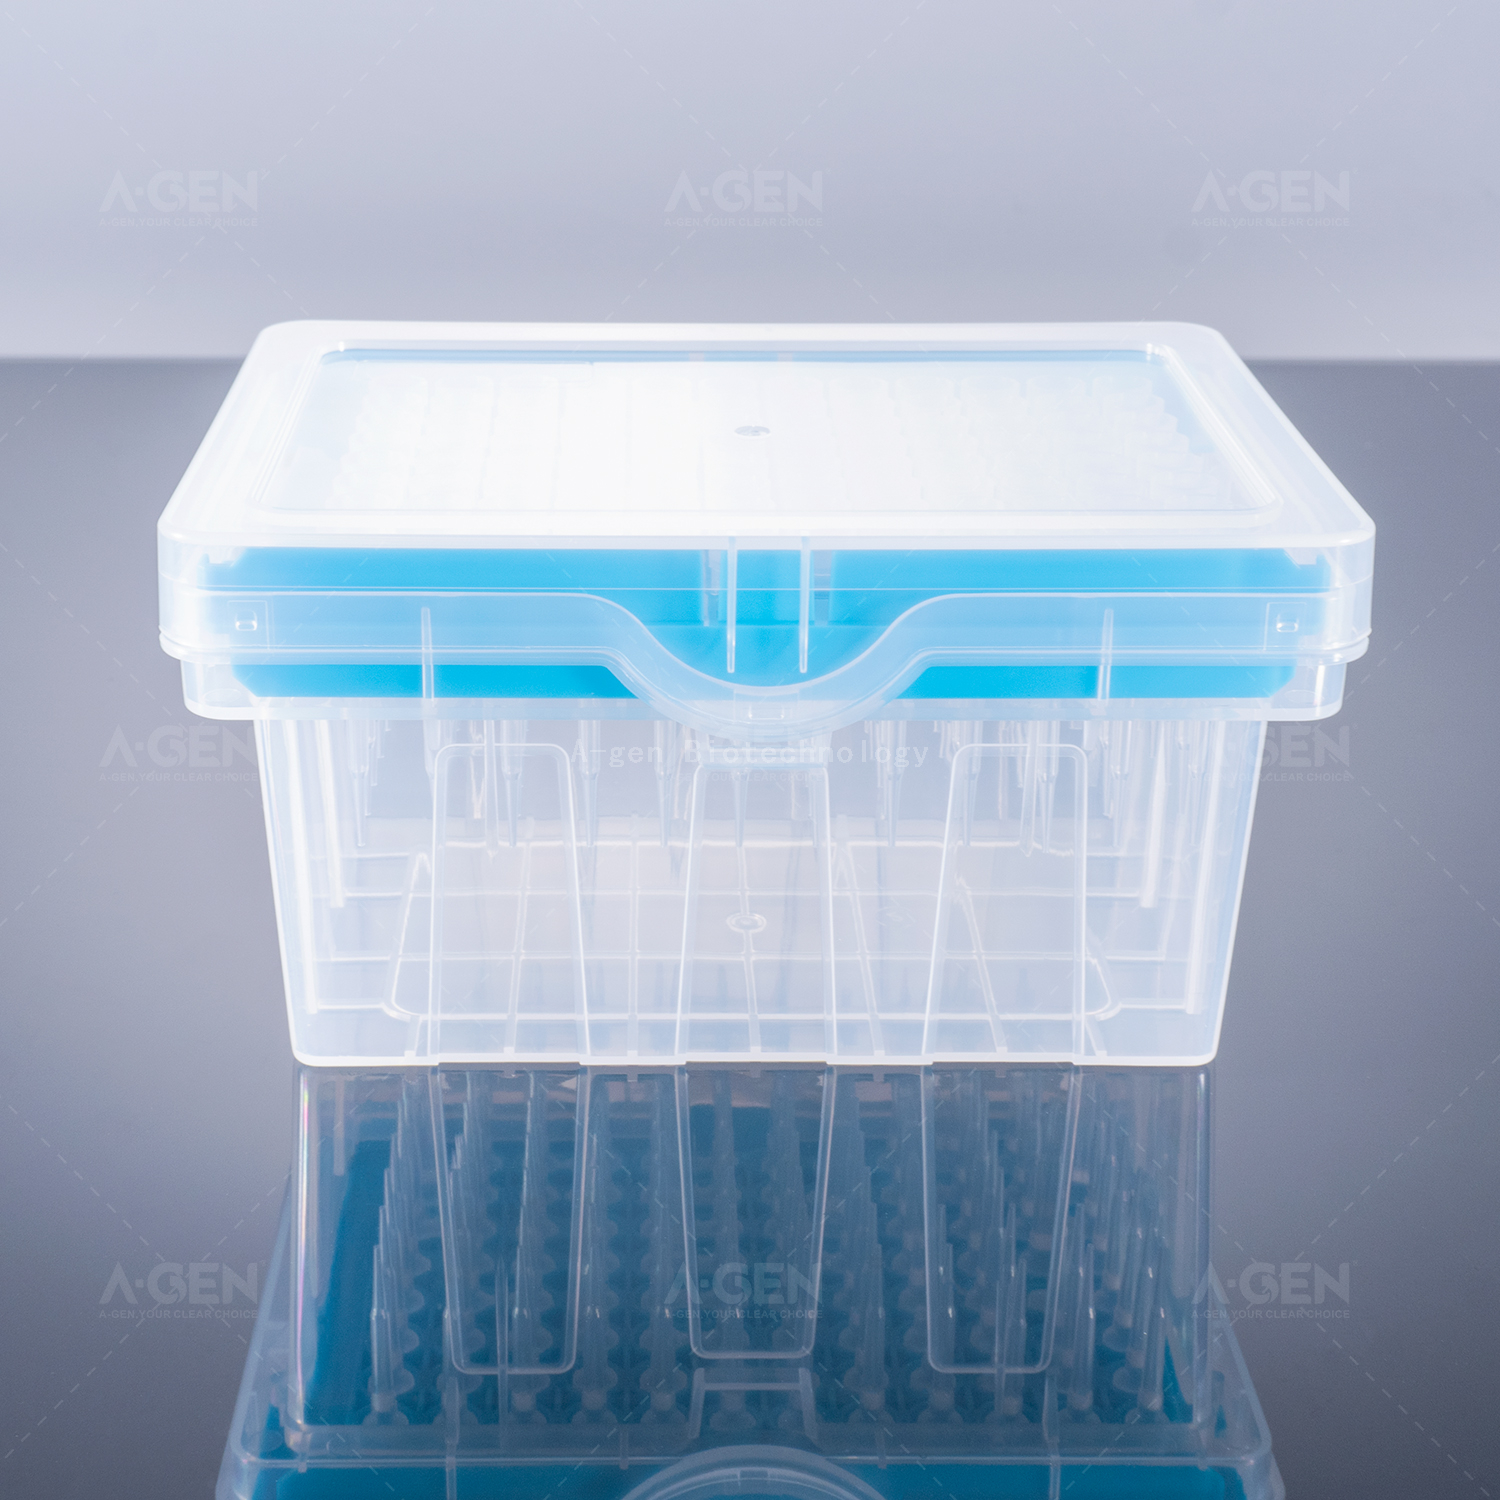 Tecan LiHa 20μL Transparent PP Pipette Tip (Racked,sterilized) for Liquid Transfer With Filter TTF-20-RSL Low Residual